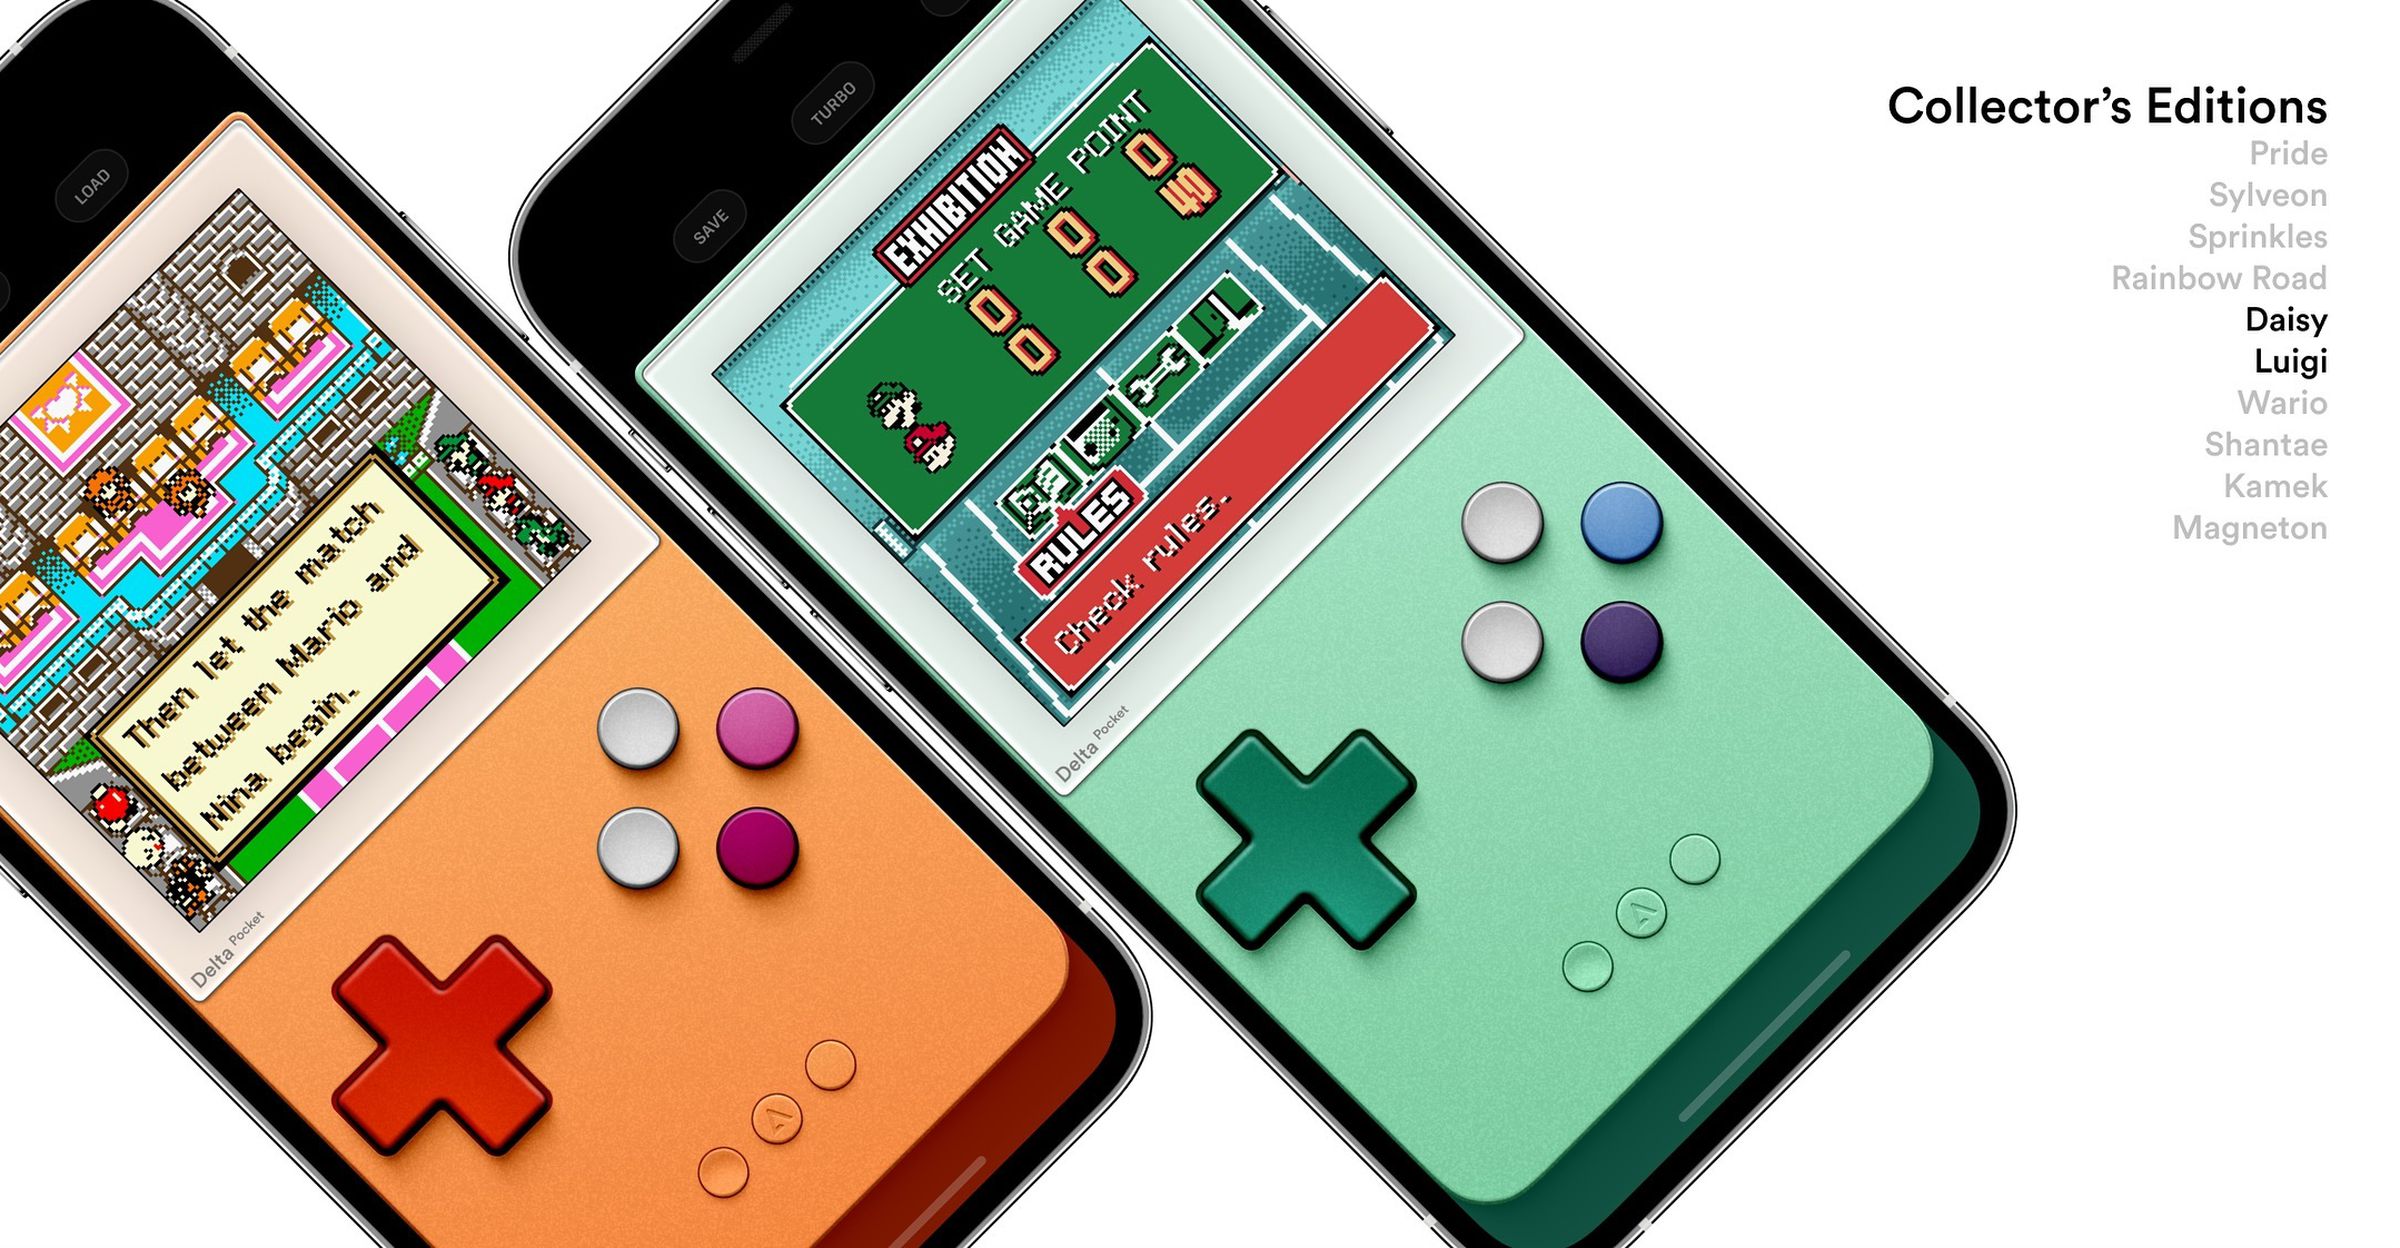 Two skins, one with a light orange color and dark orange d-pad with white, pink, and maroon buttons, one with a seafoam color, green d-pad, and white, light blue, and black buttons